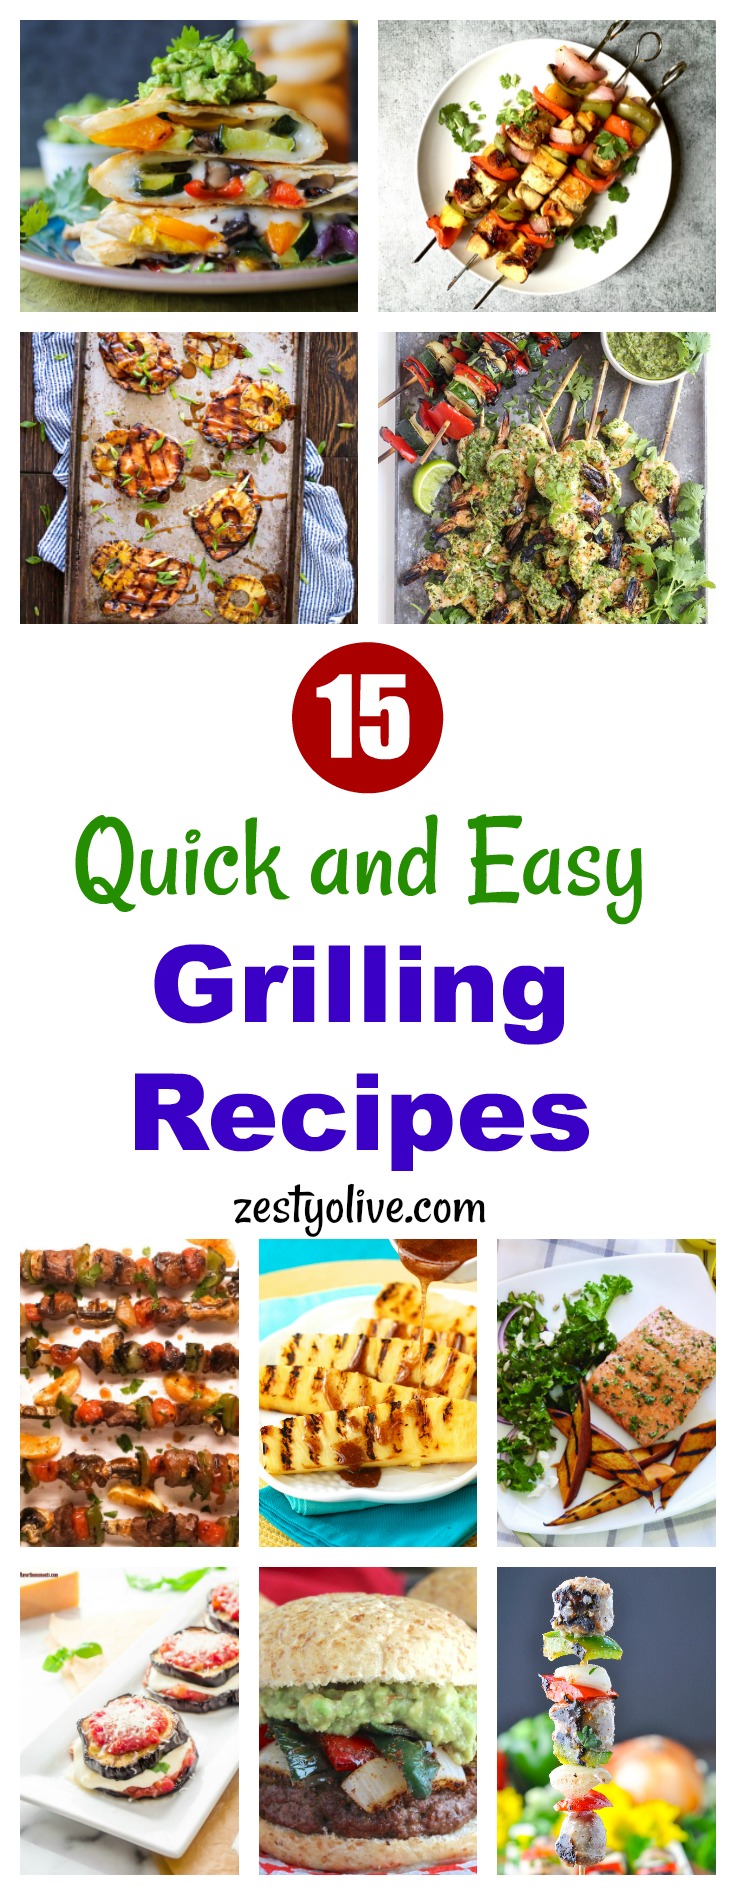 15 Quick and Easy Grilling Recipes